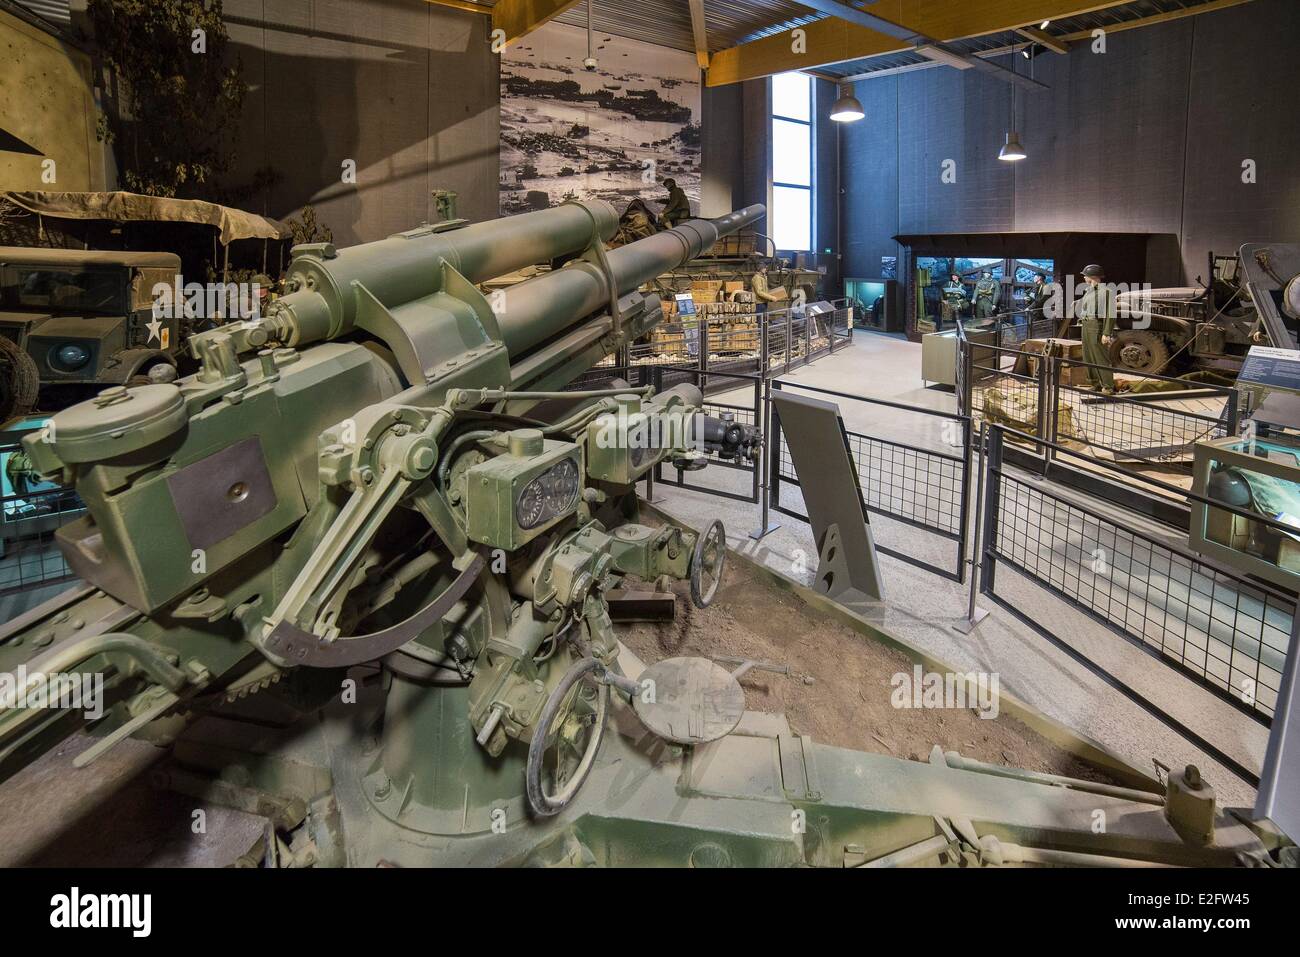 France Calvados Colleville sur Mer Overlord Museum Normandy 44 collection inside the museum 88 mm german gun or Flak 36 Stock Photo